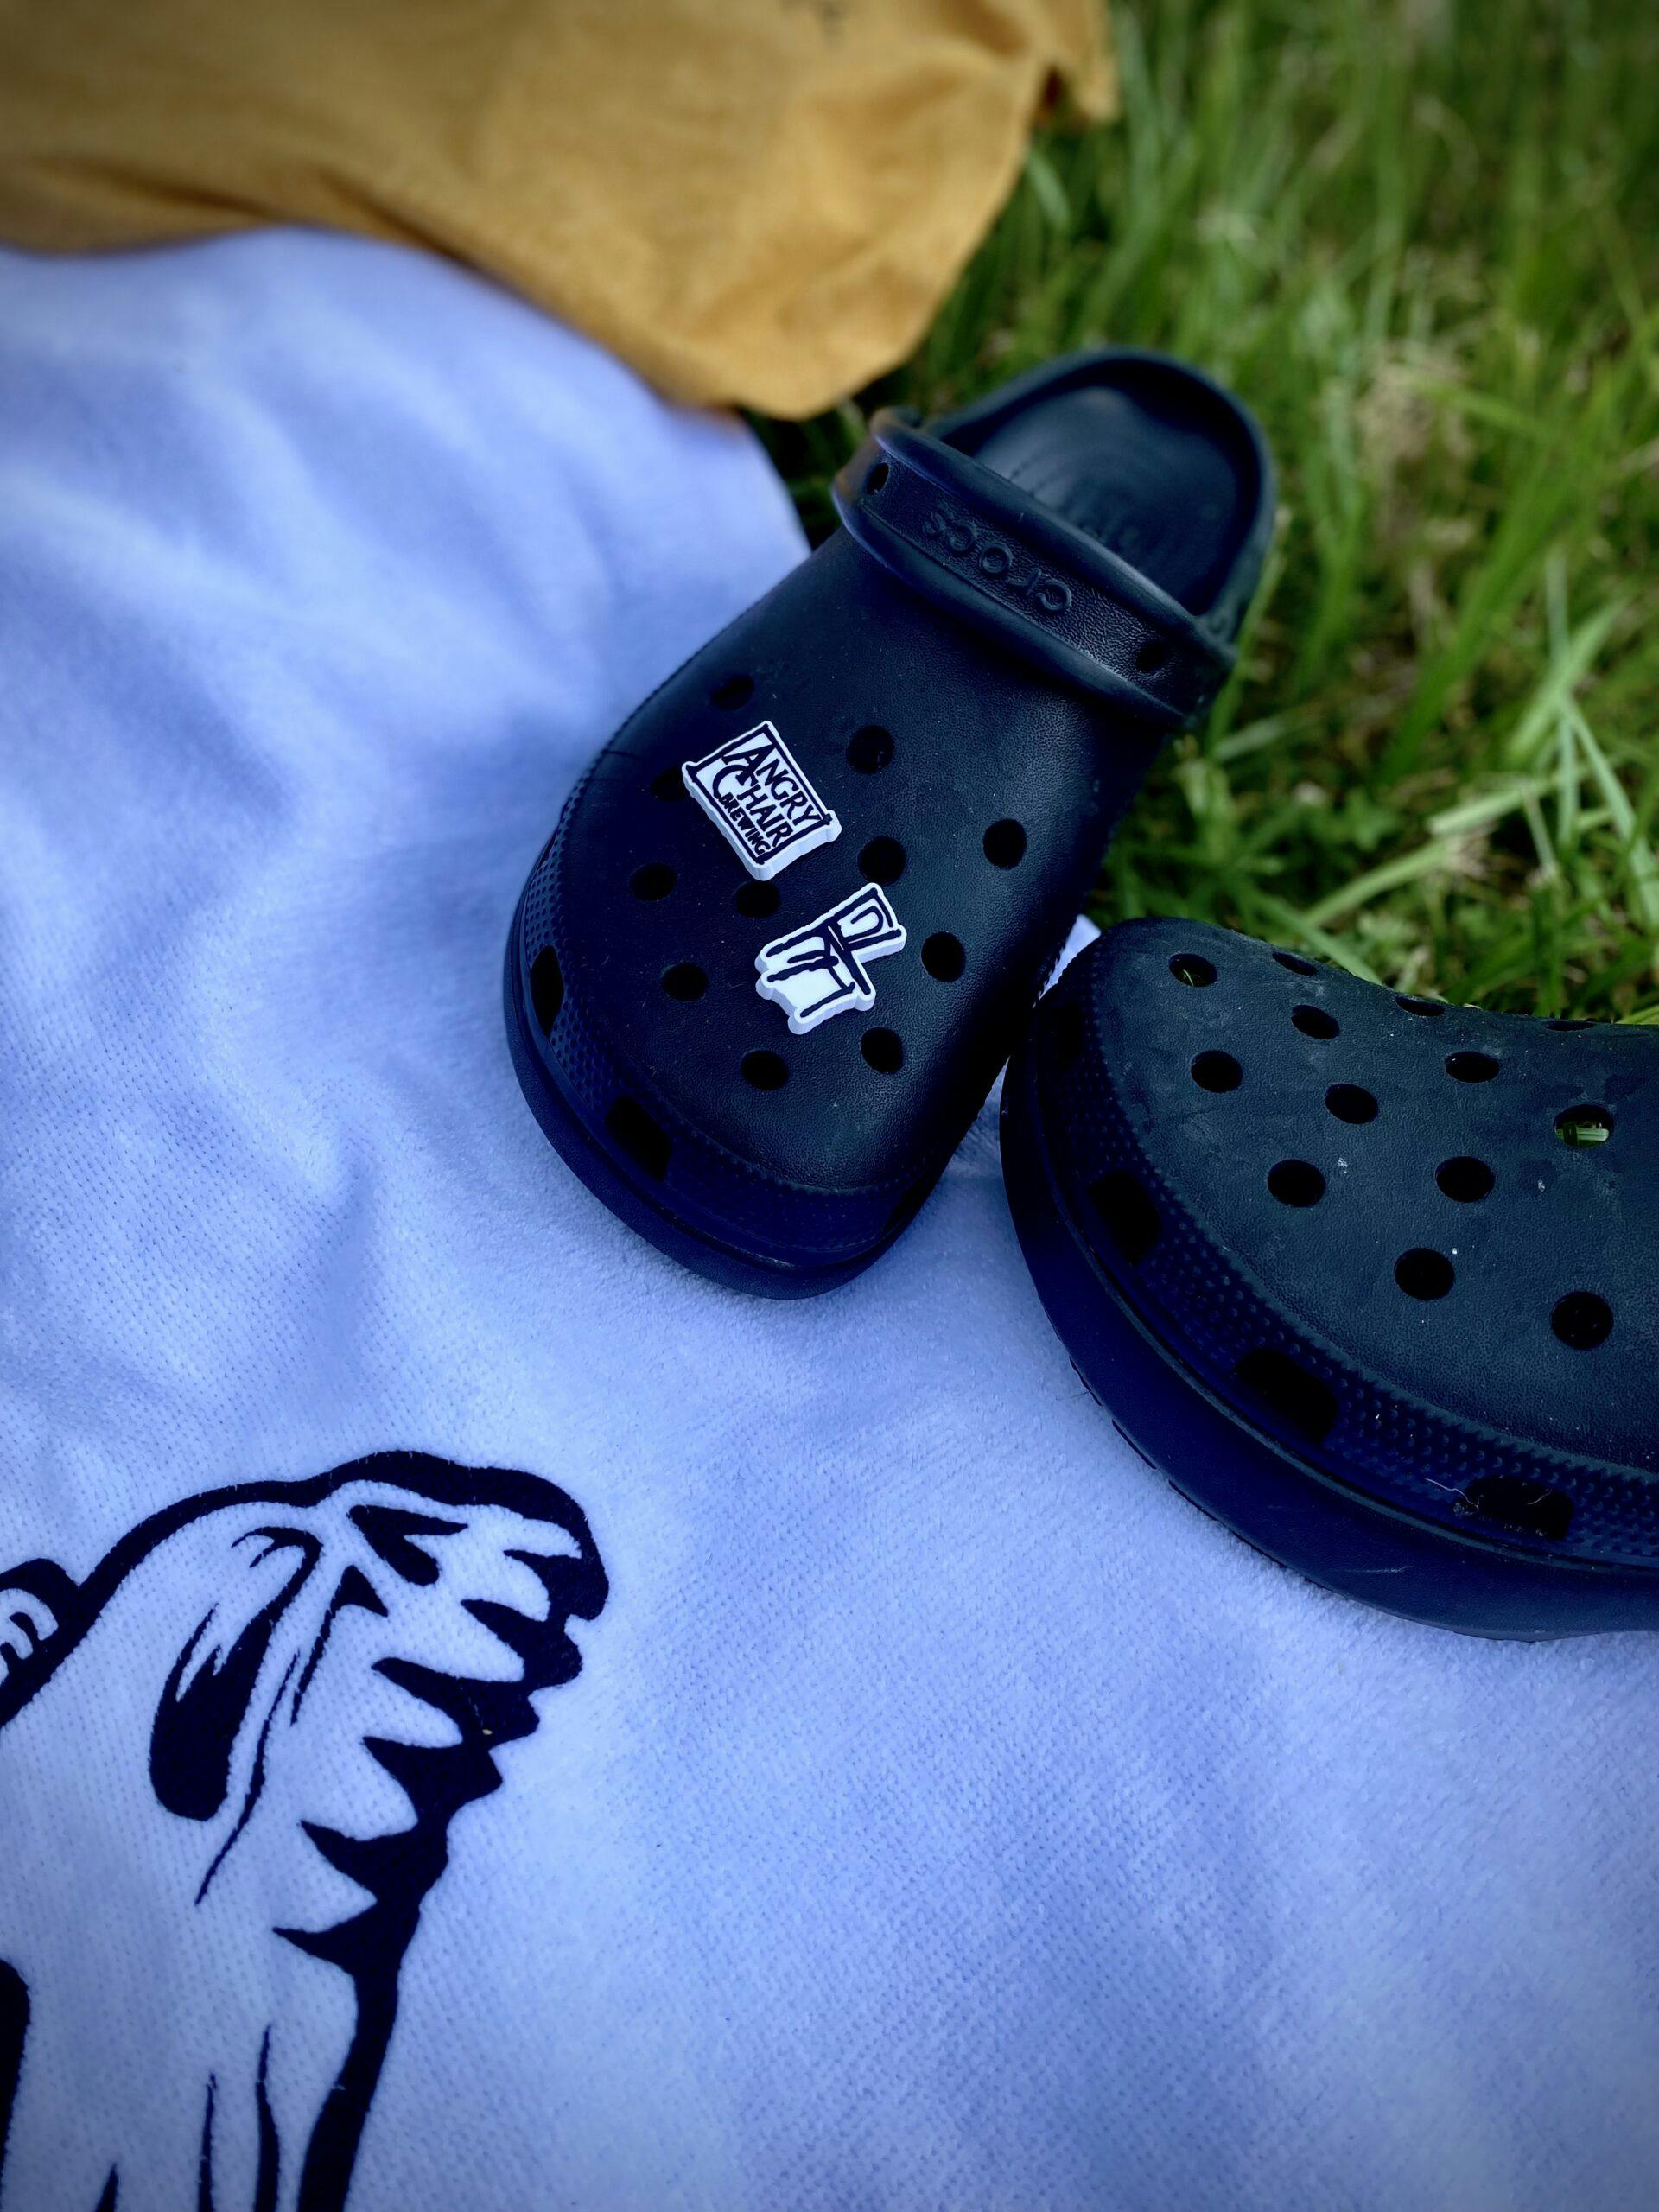 Pin by toribaby on feeties  Crocs fashion, Crocs with charms